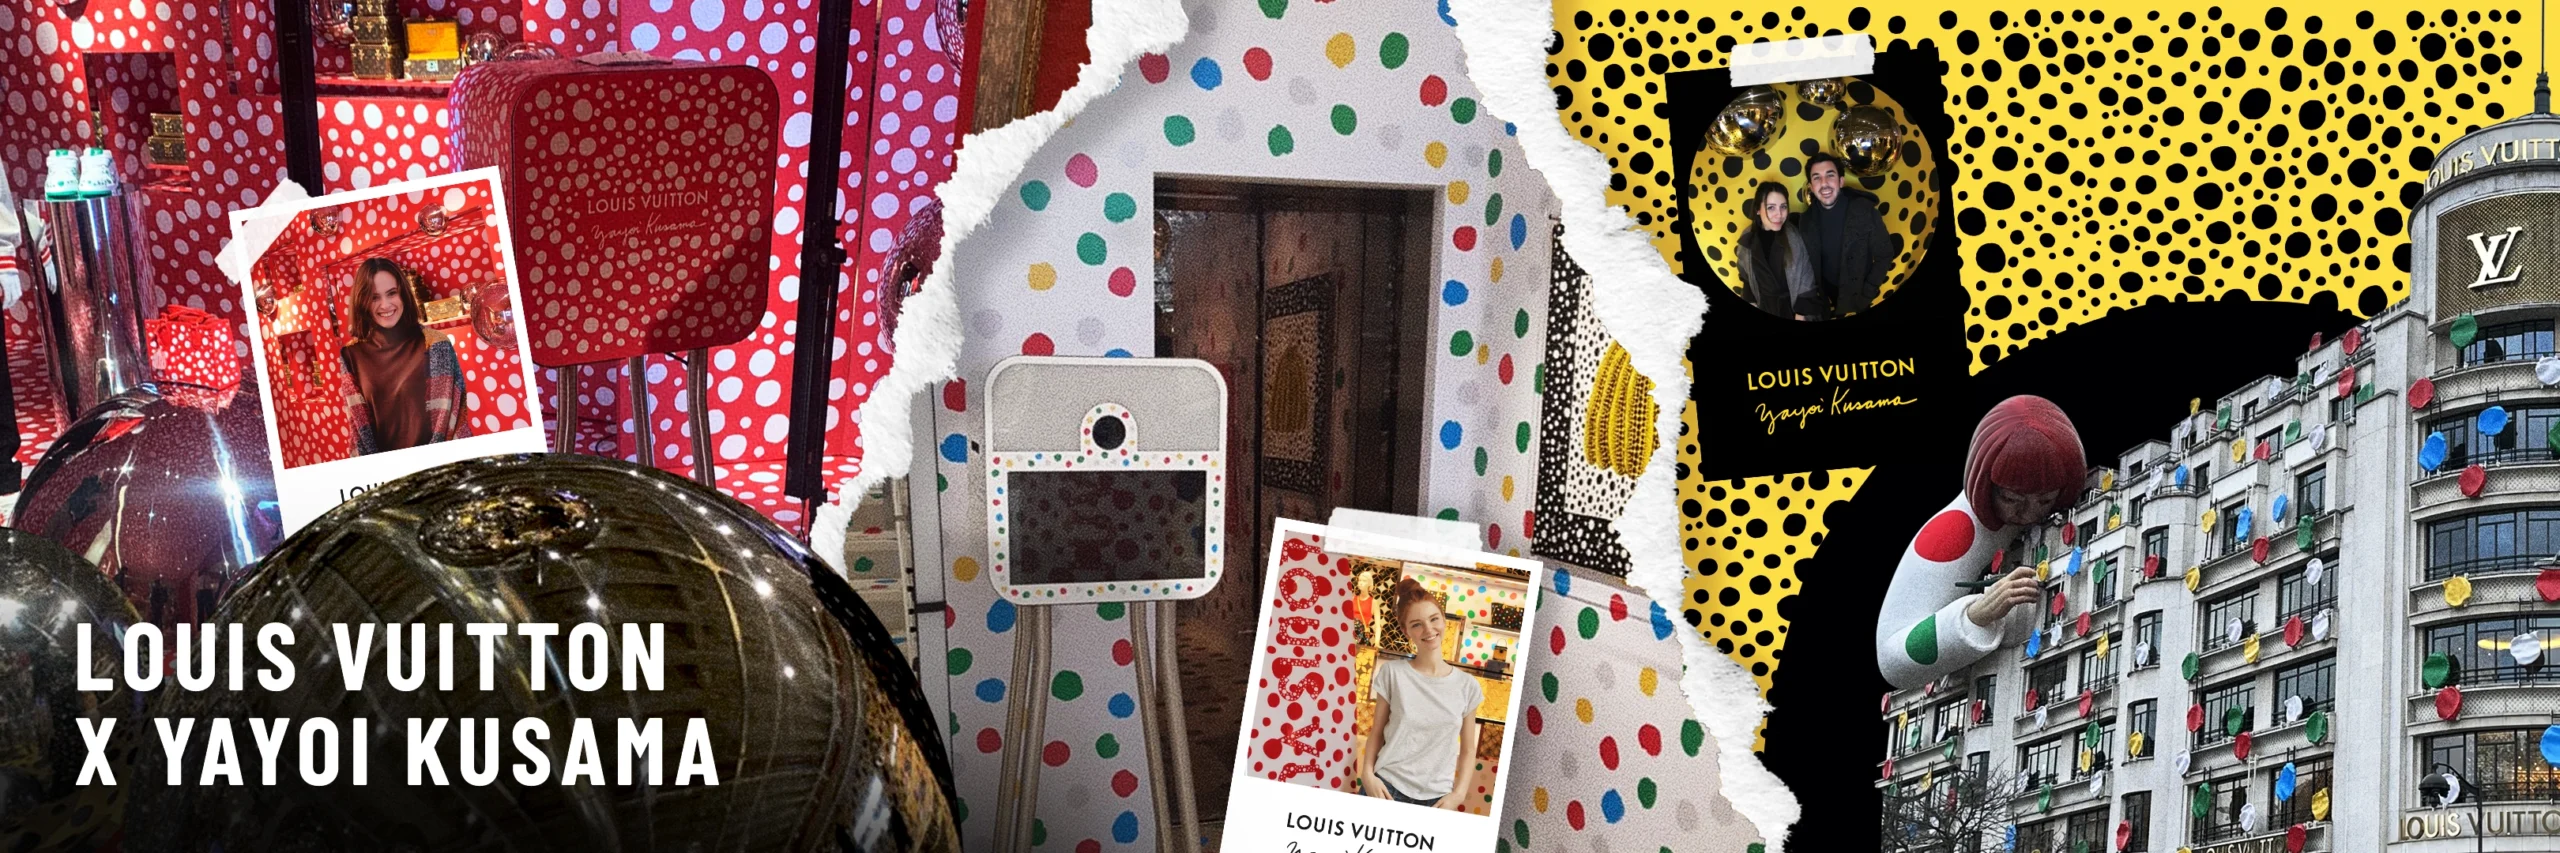 A vibrant montage showcasing a collaboration, with dotted patterns and eclectic designs, interspersed with images our sharingbox photobooth, and a playful figure overlooking a decorated building.